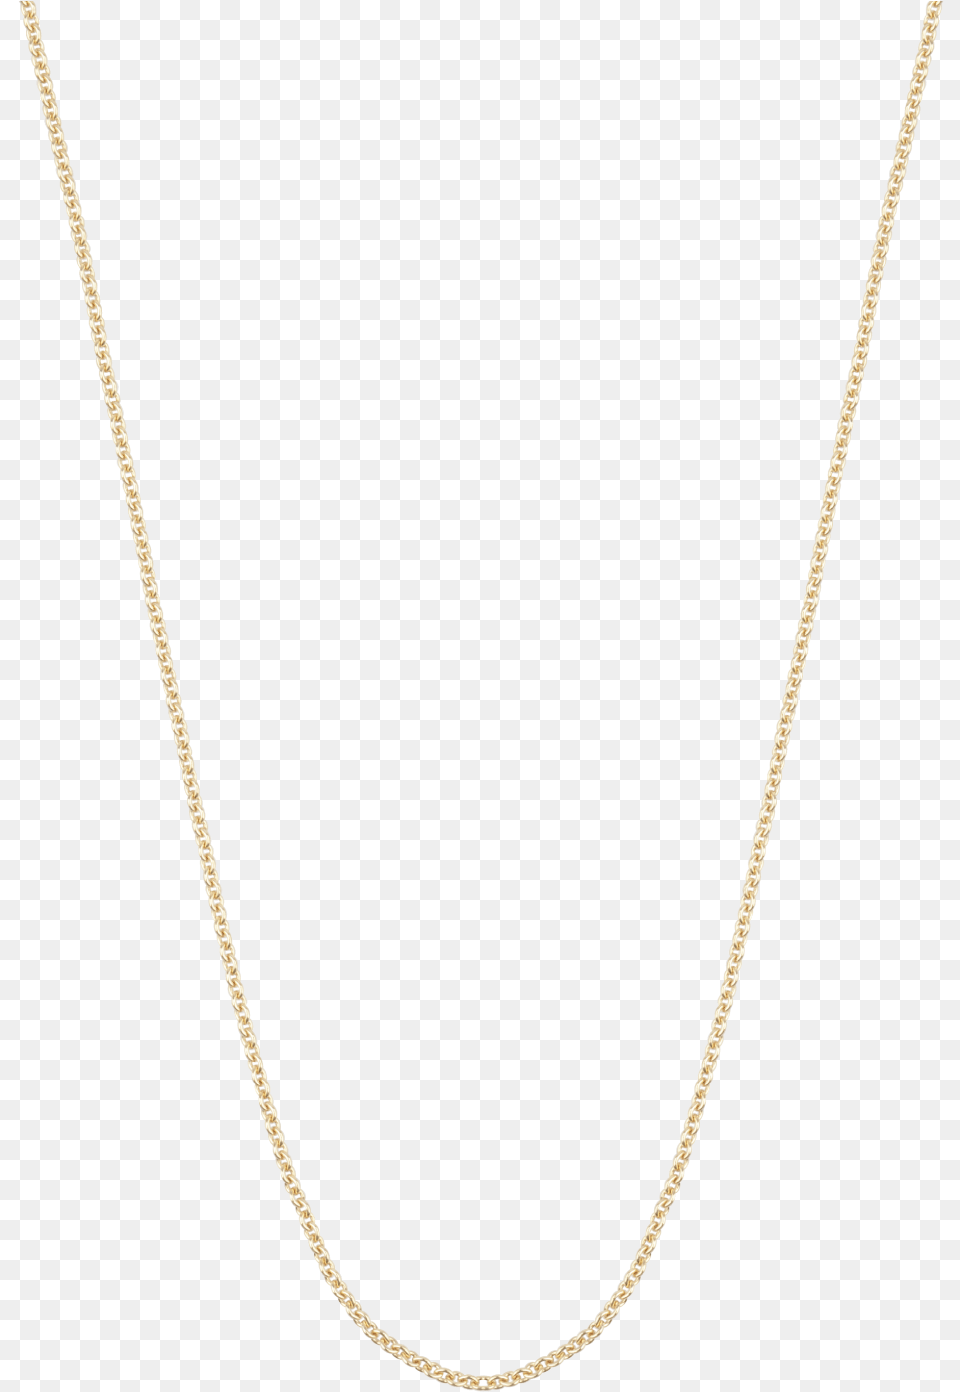 Coin Necklace Chain, Accessories, Jewelry Png Image